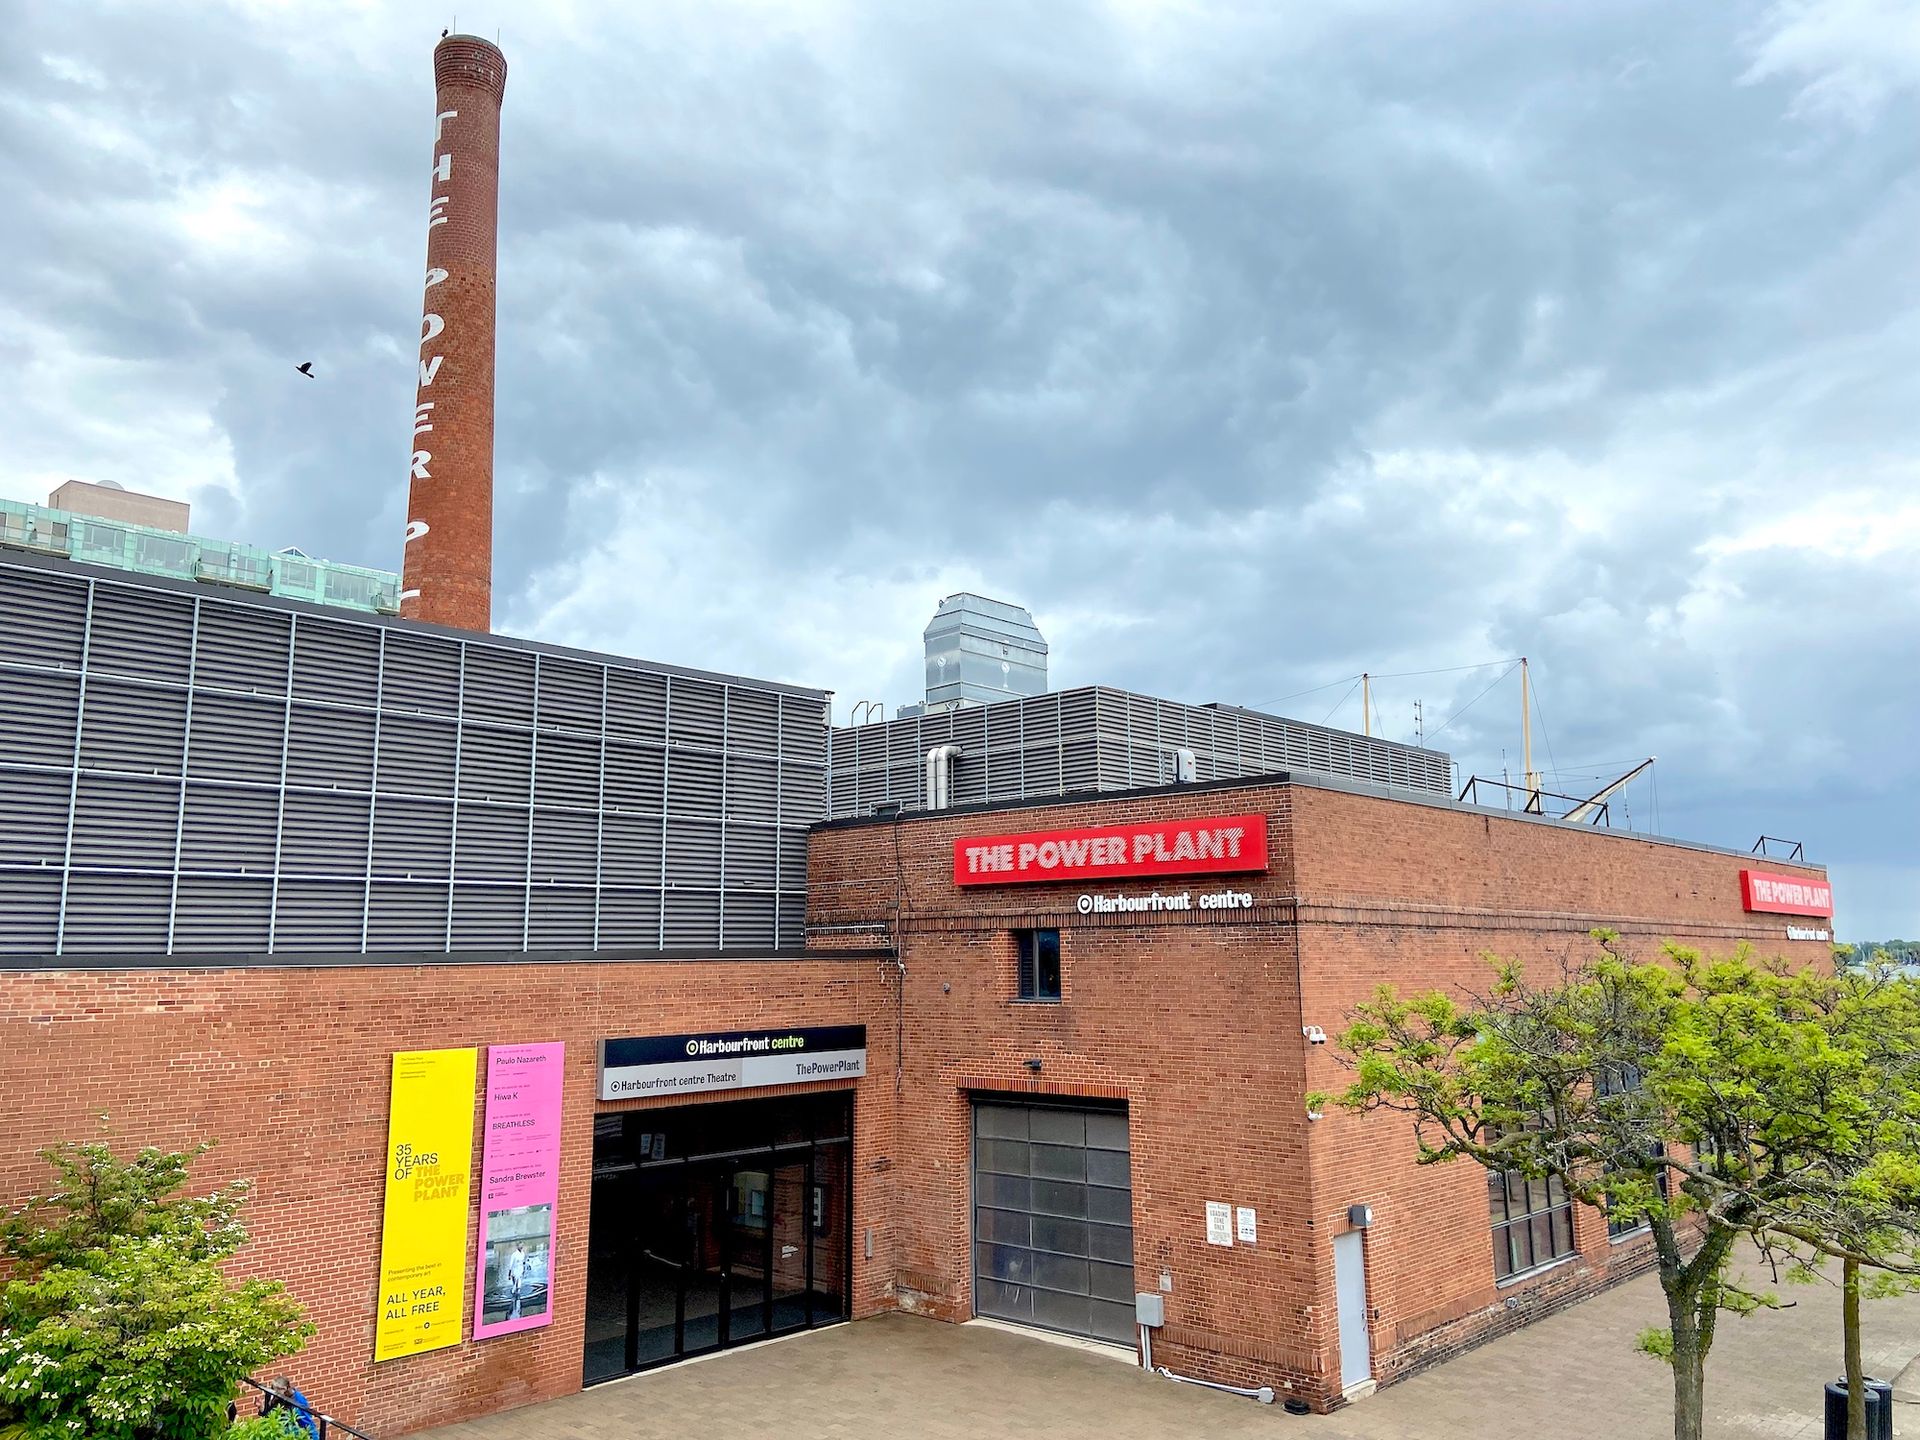 The Power Plant contemporary art centre in Toronto Photo by Mshum1234, via Wikimedia Commons